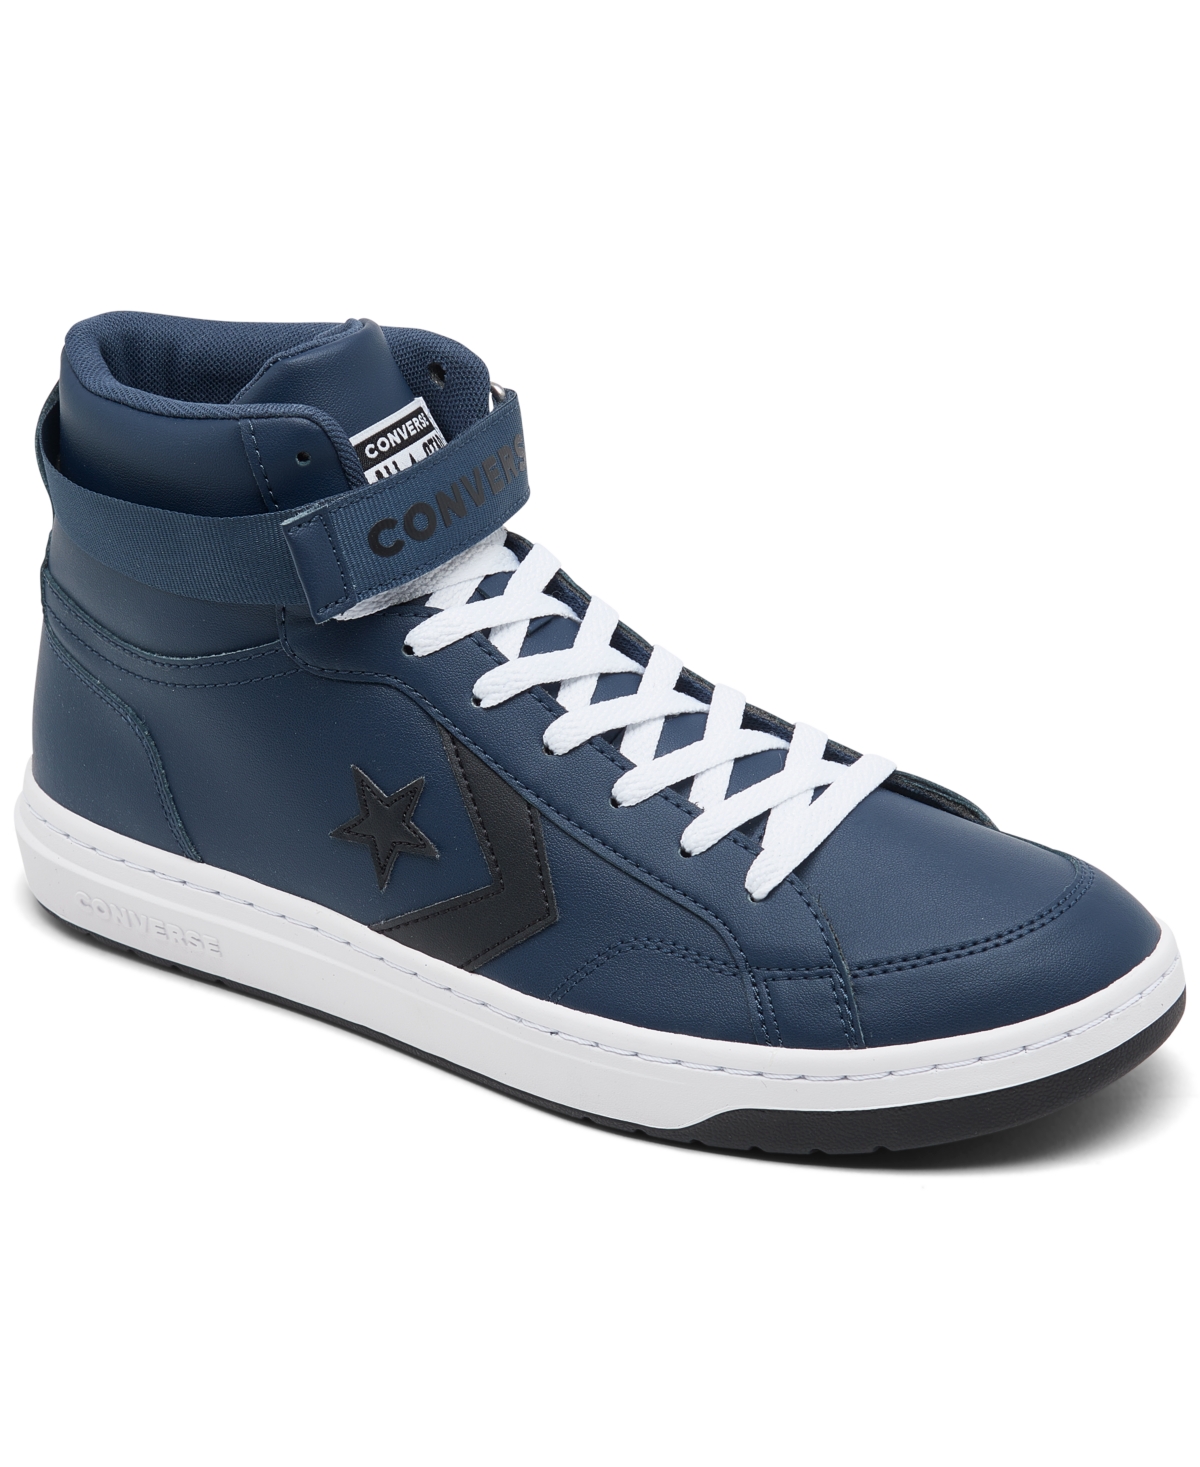 Shop Converse Men's Pro Blaze V2 Mid-top Casual Sneakers From Finish Line In Navy,black,white